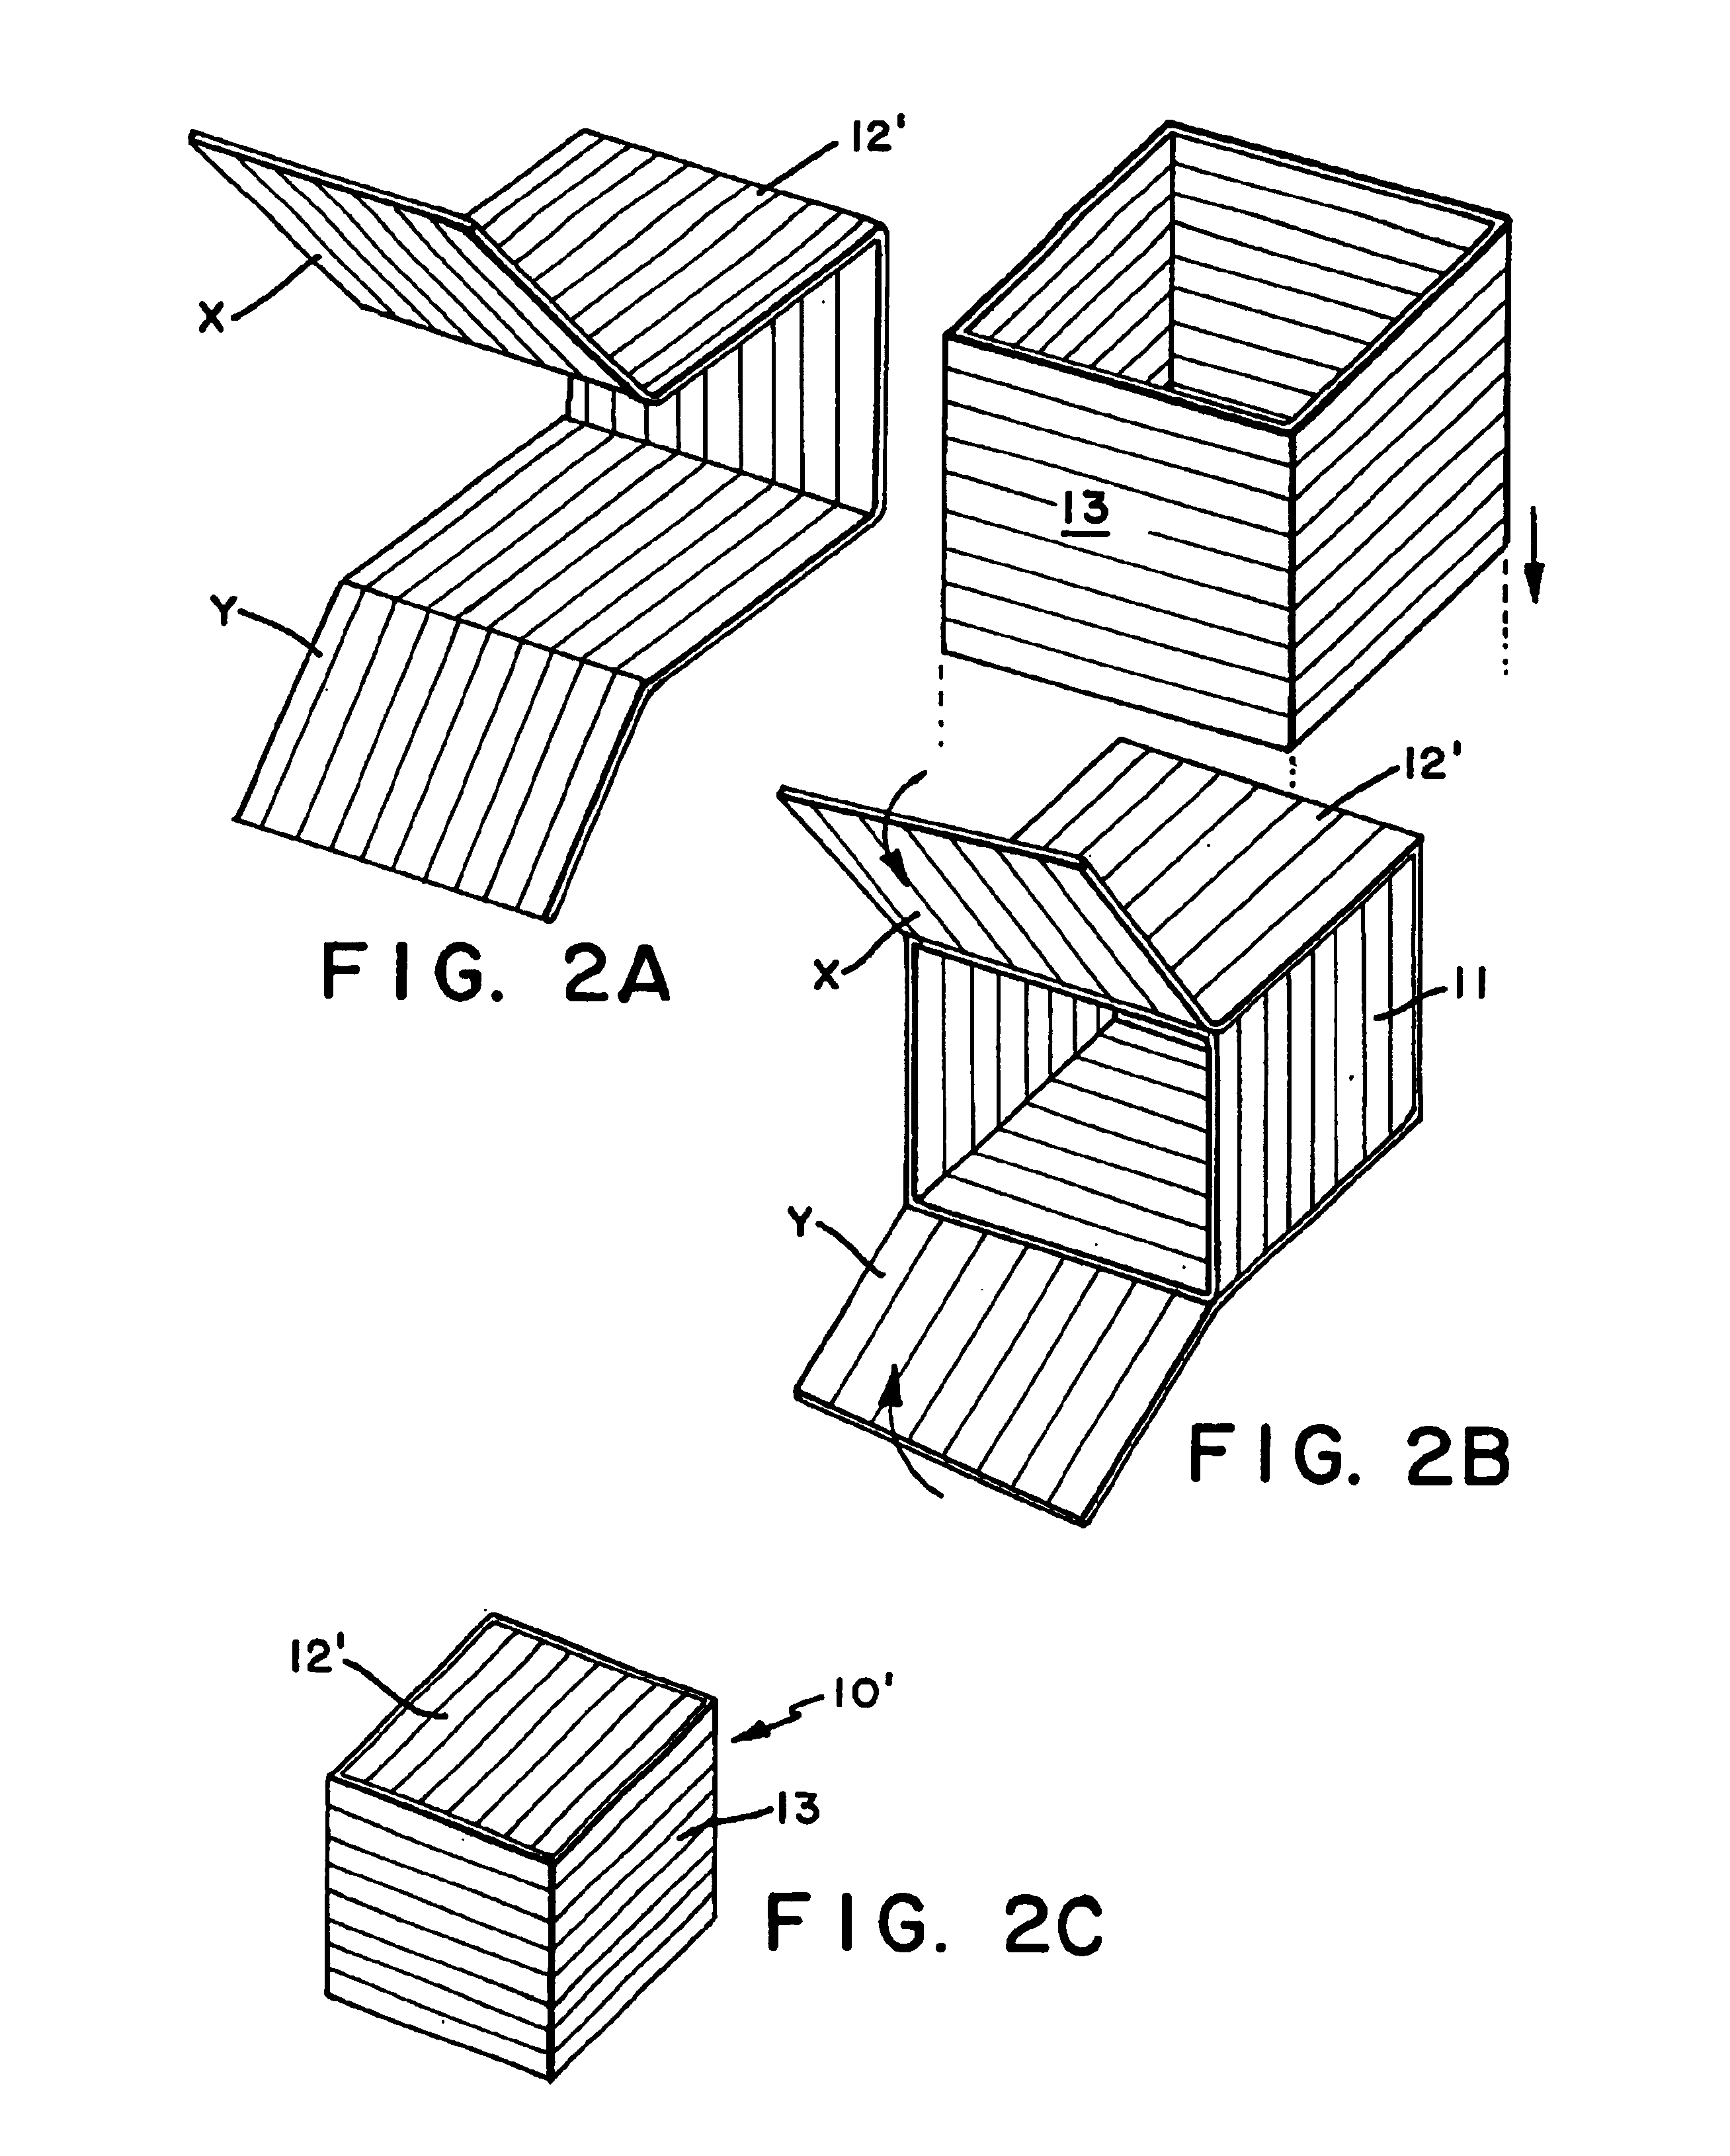 Blast resistant and blast directing containers and methods of making